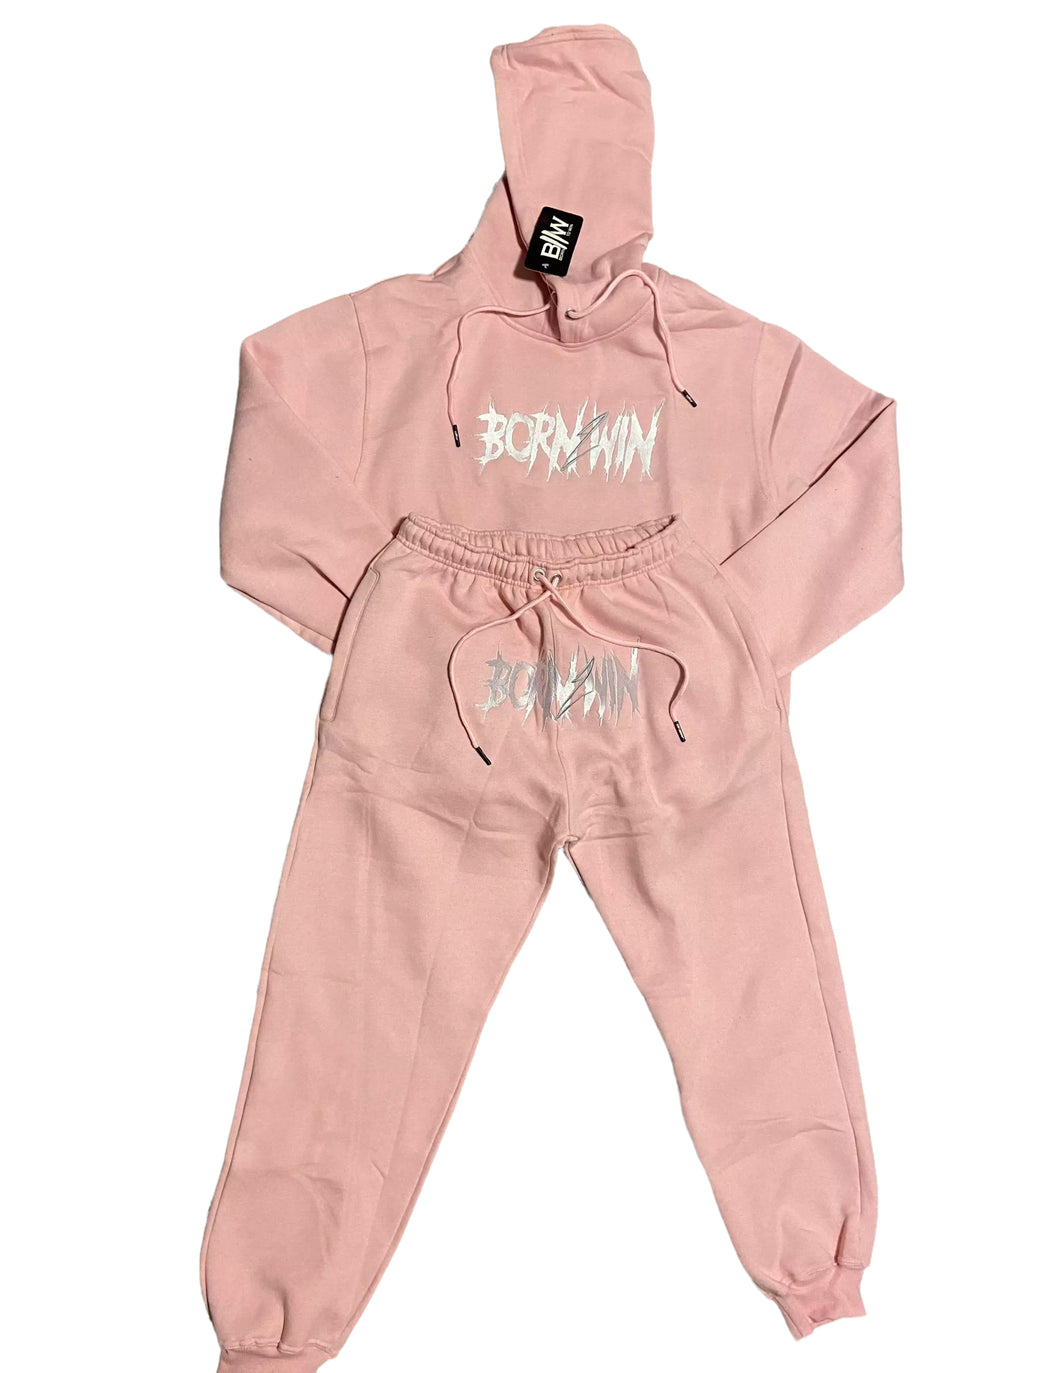 Pink Embroidery Born 2 Win sweat outfit